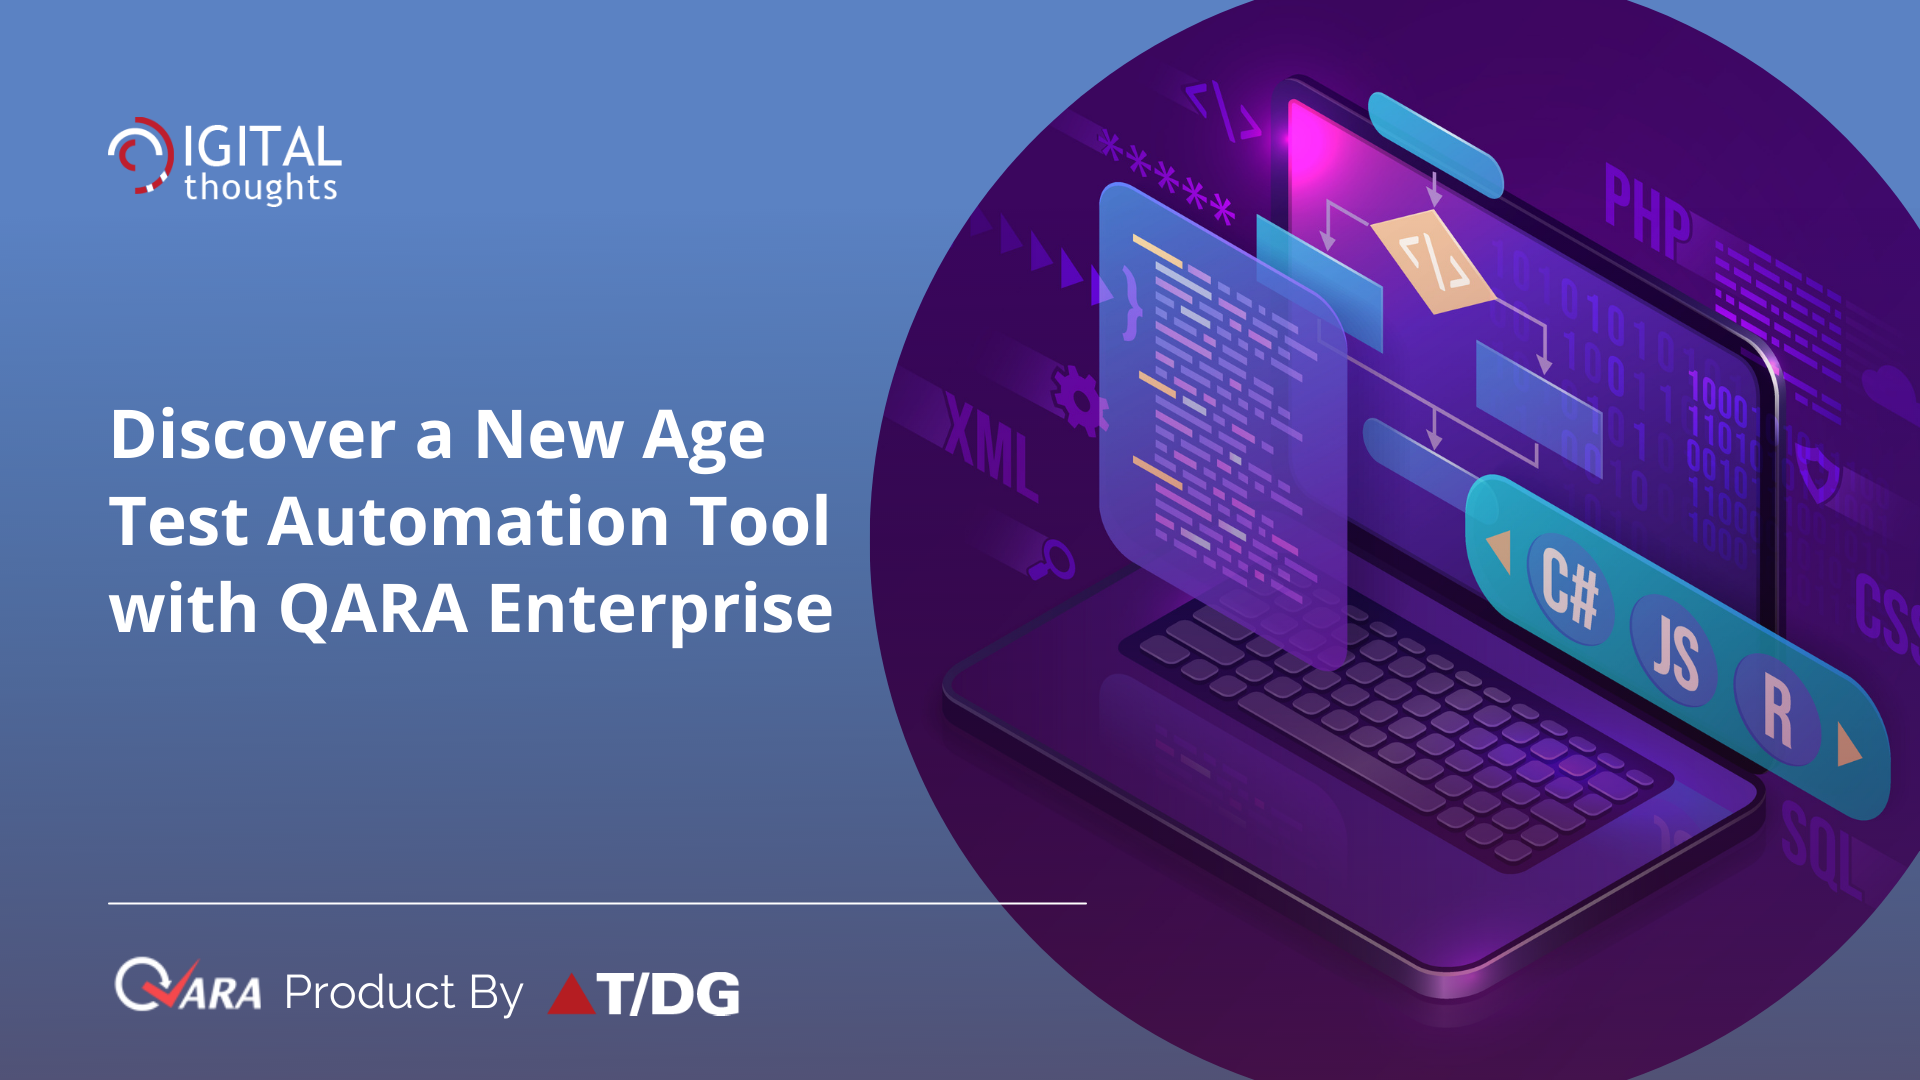 Discover a New Age Test Automation Tool with QARA Enterprise